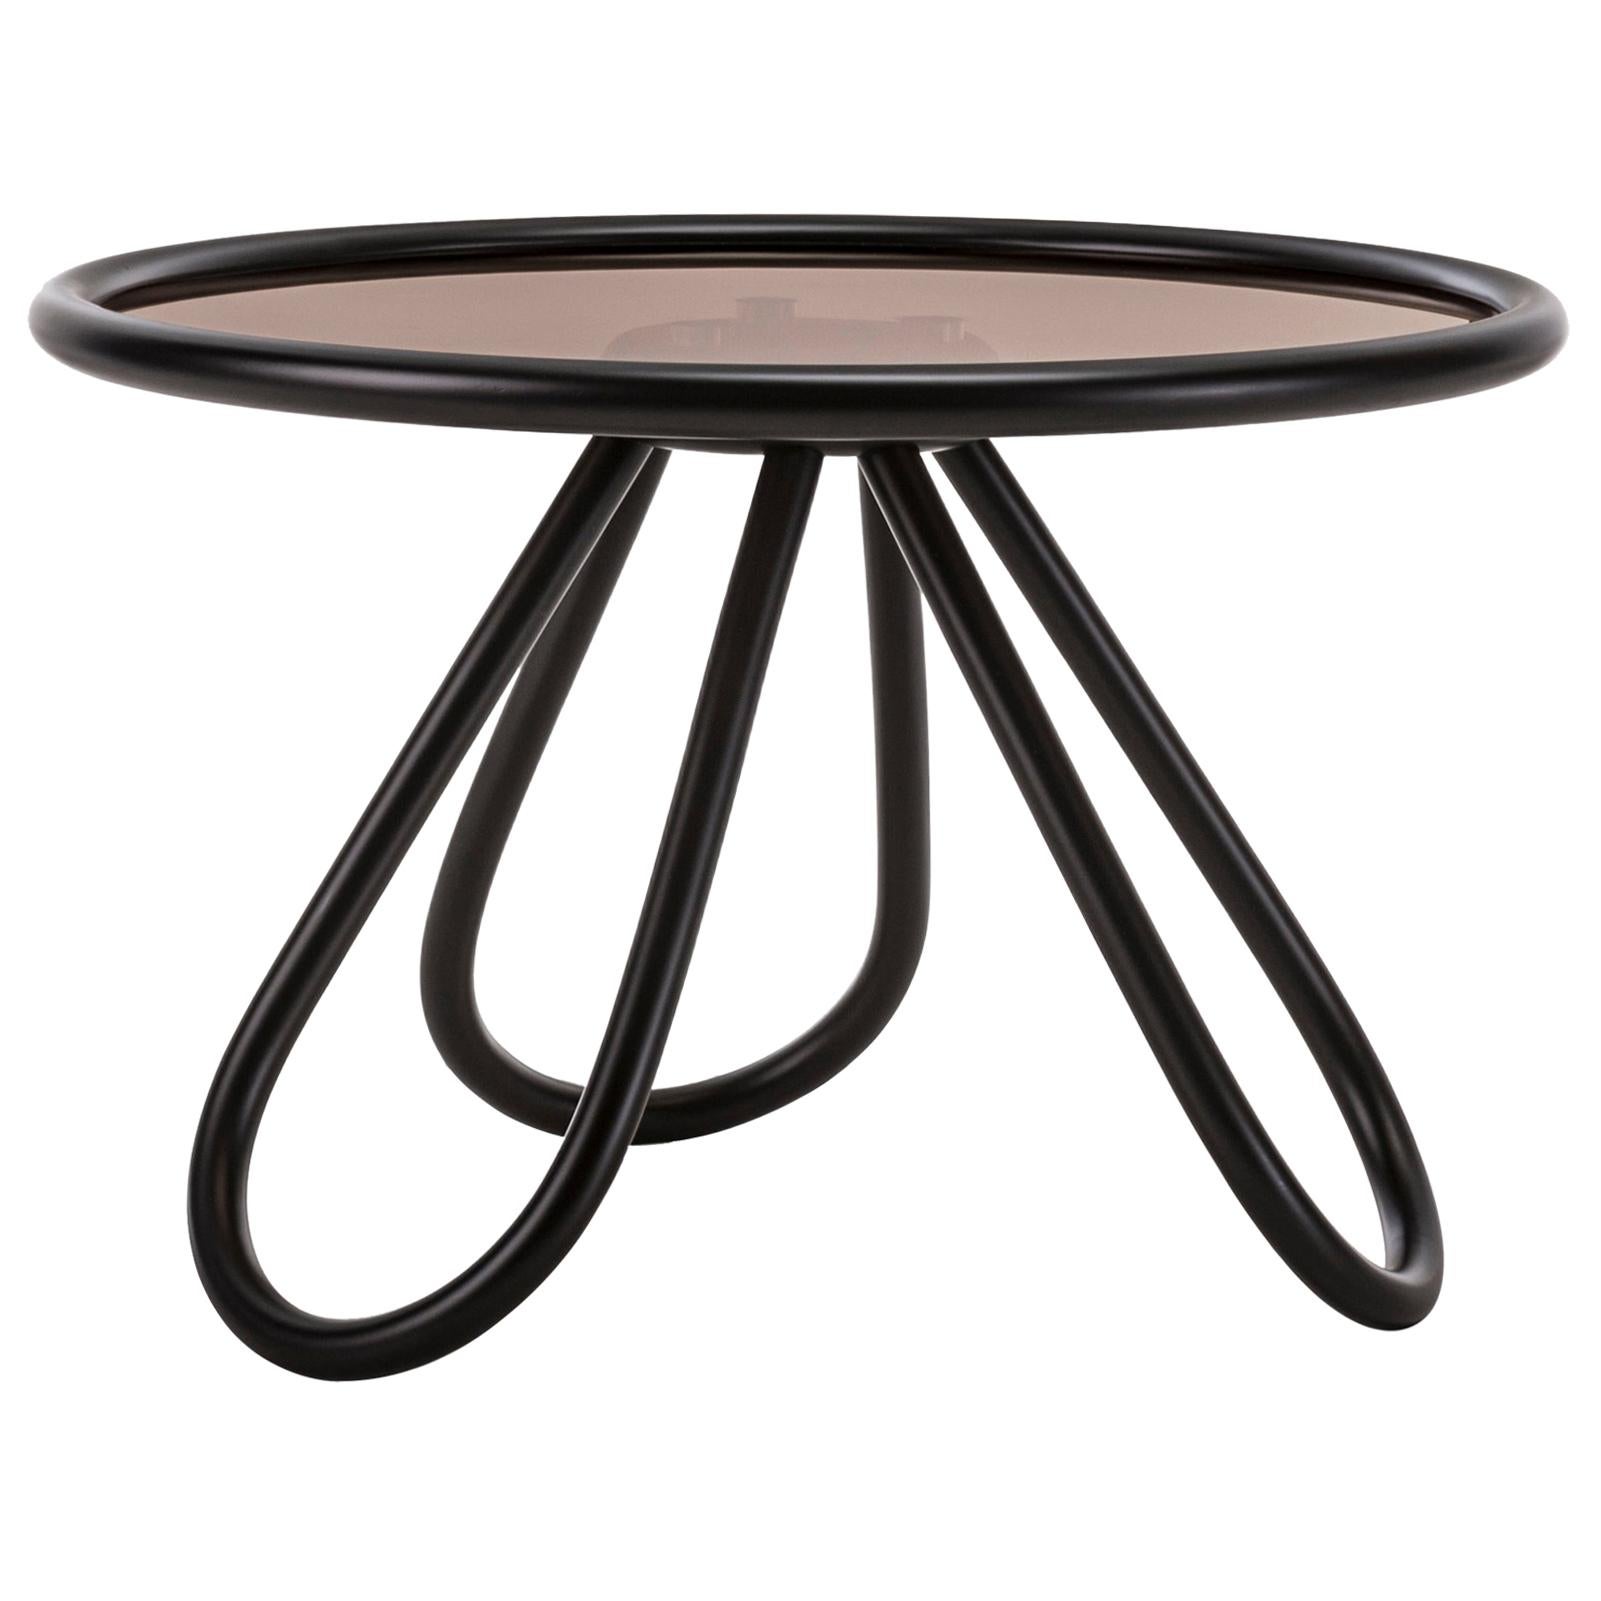 Gebrüder Thonet Vienna GmbH Arch Coffee Table in Black Lacquered Wood with Glass